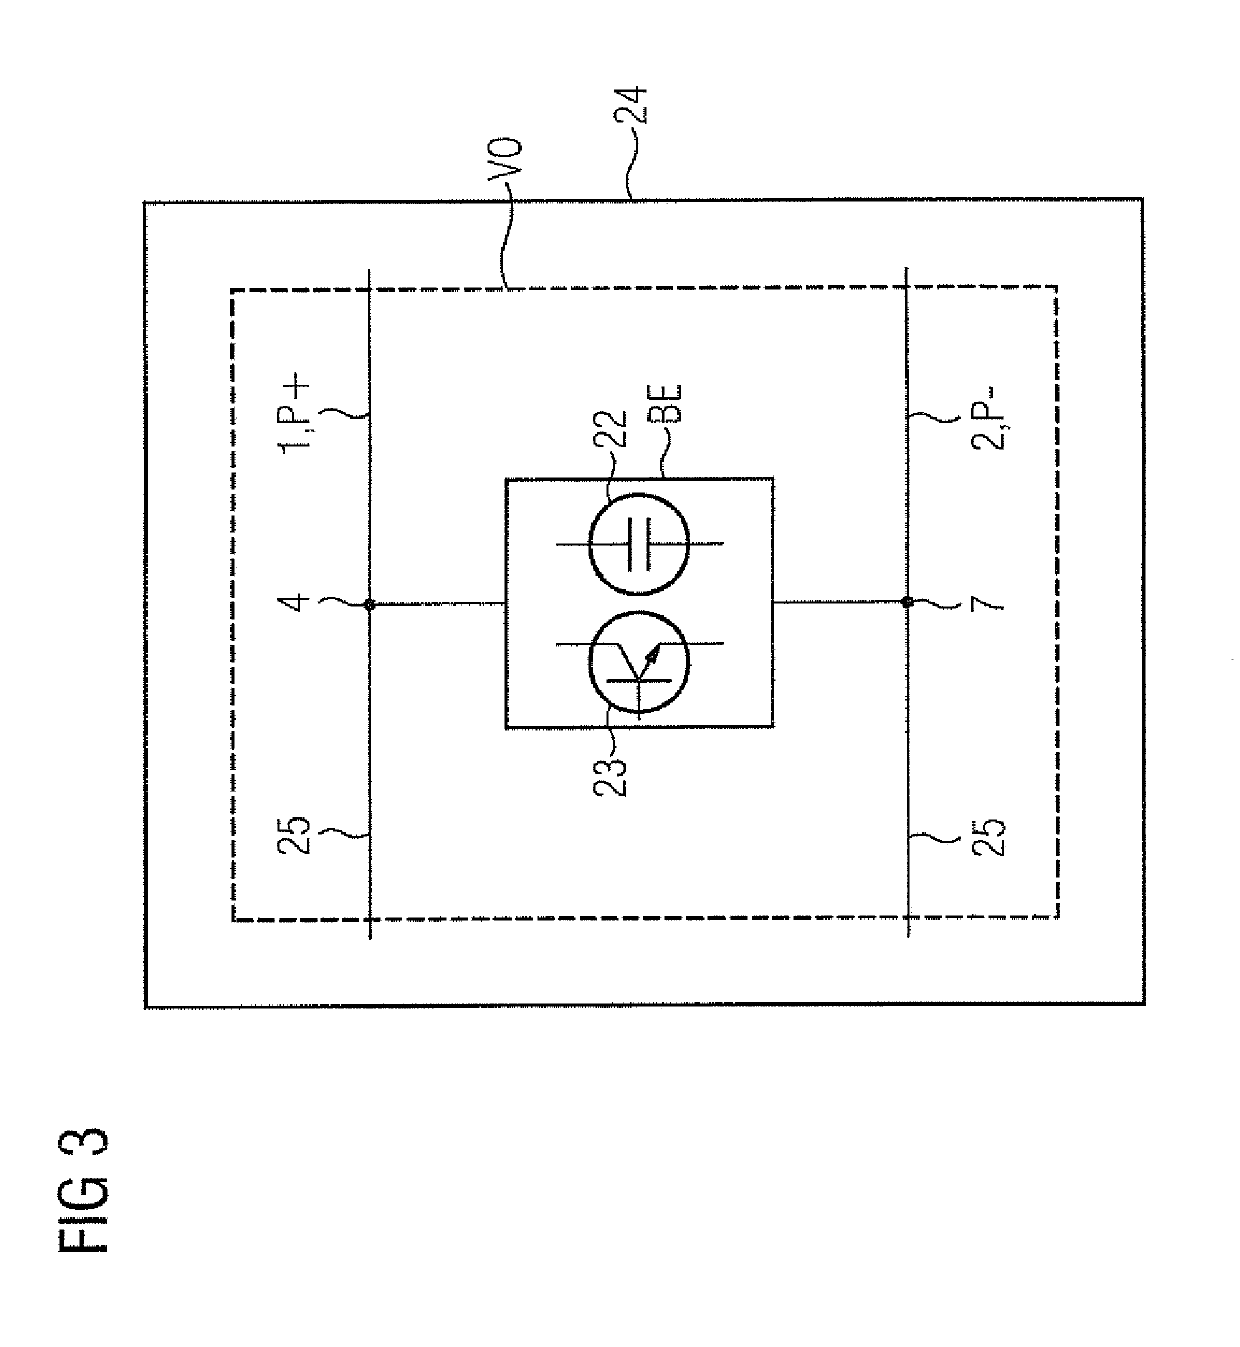 Apparatus for electrically connecting at least one electrical component to a first and second busbar